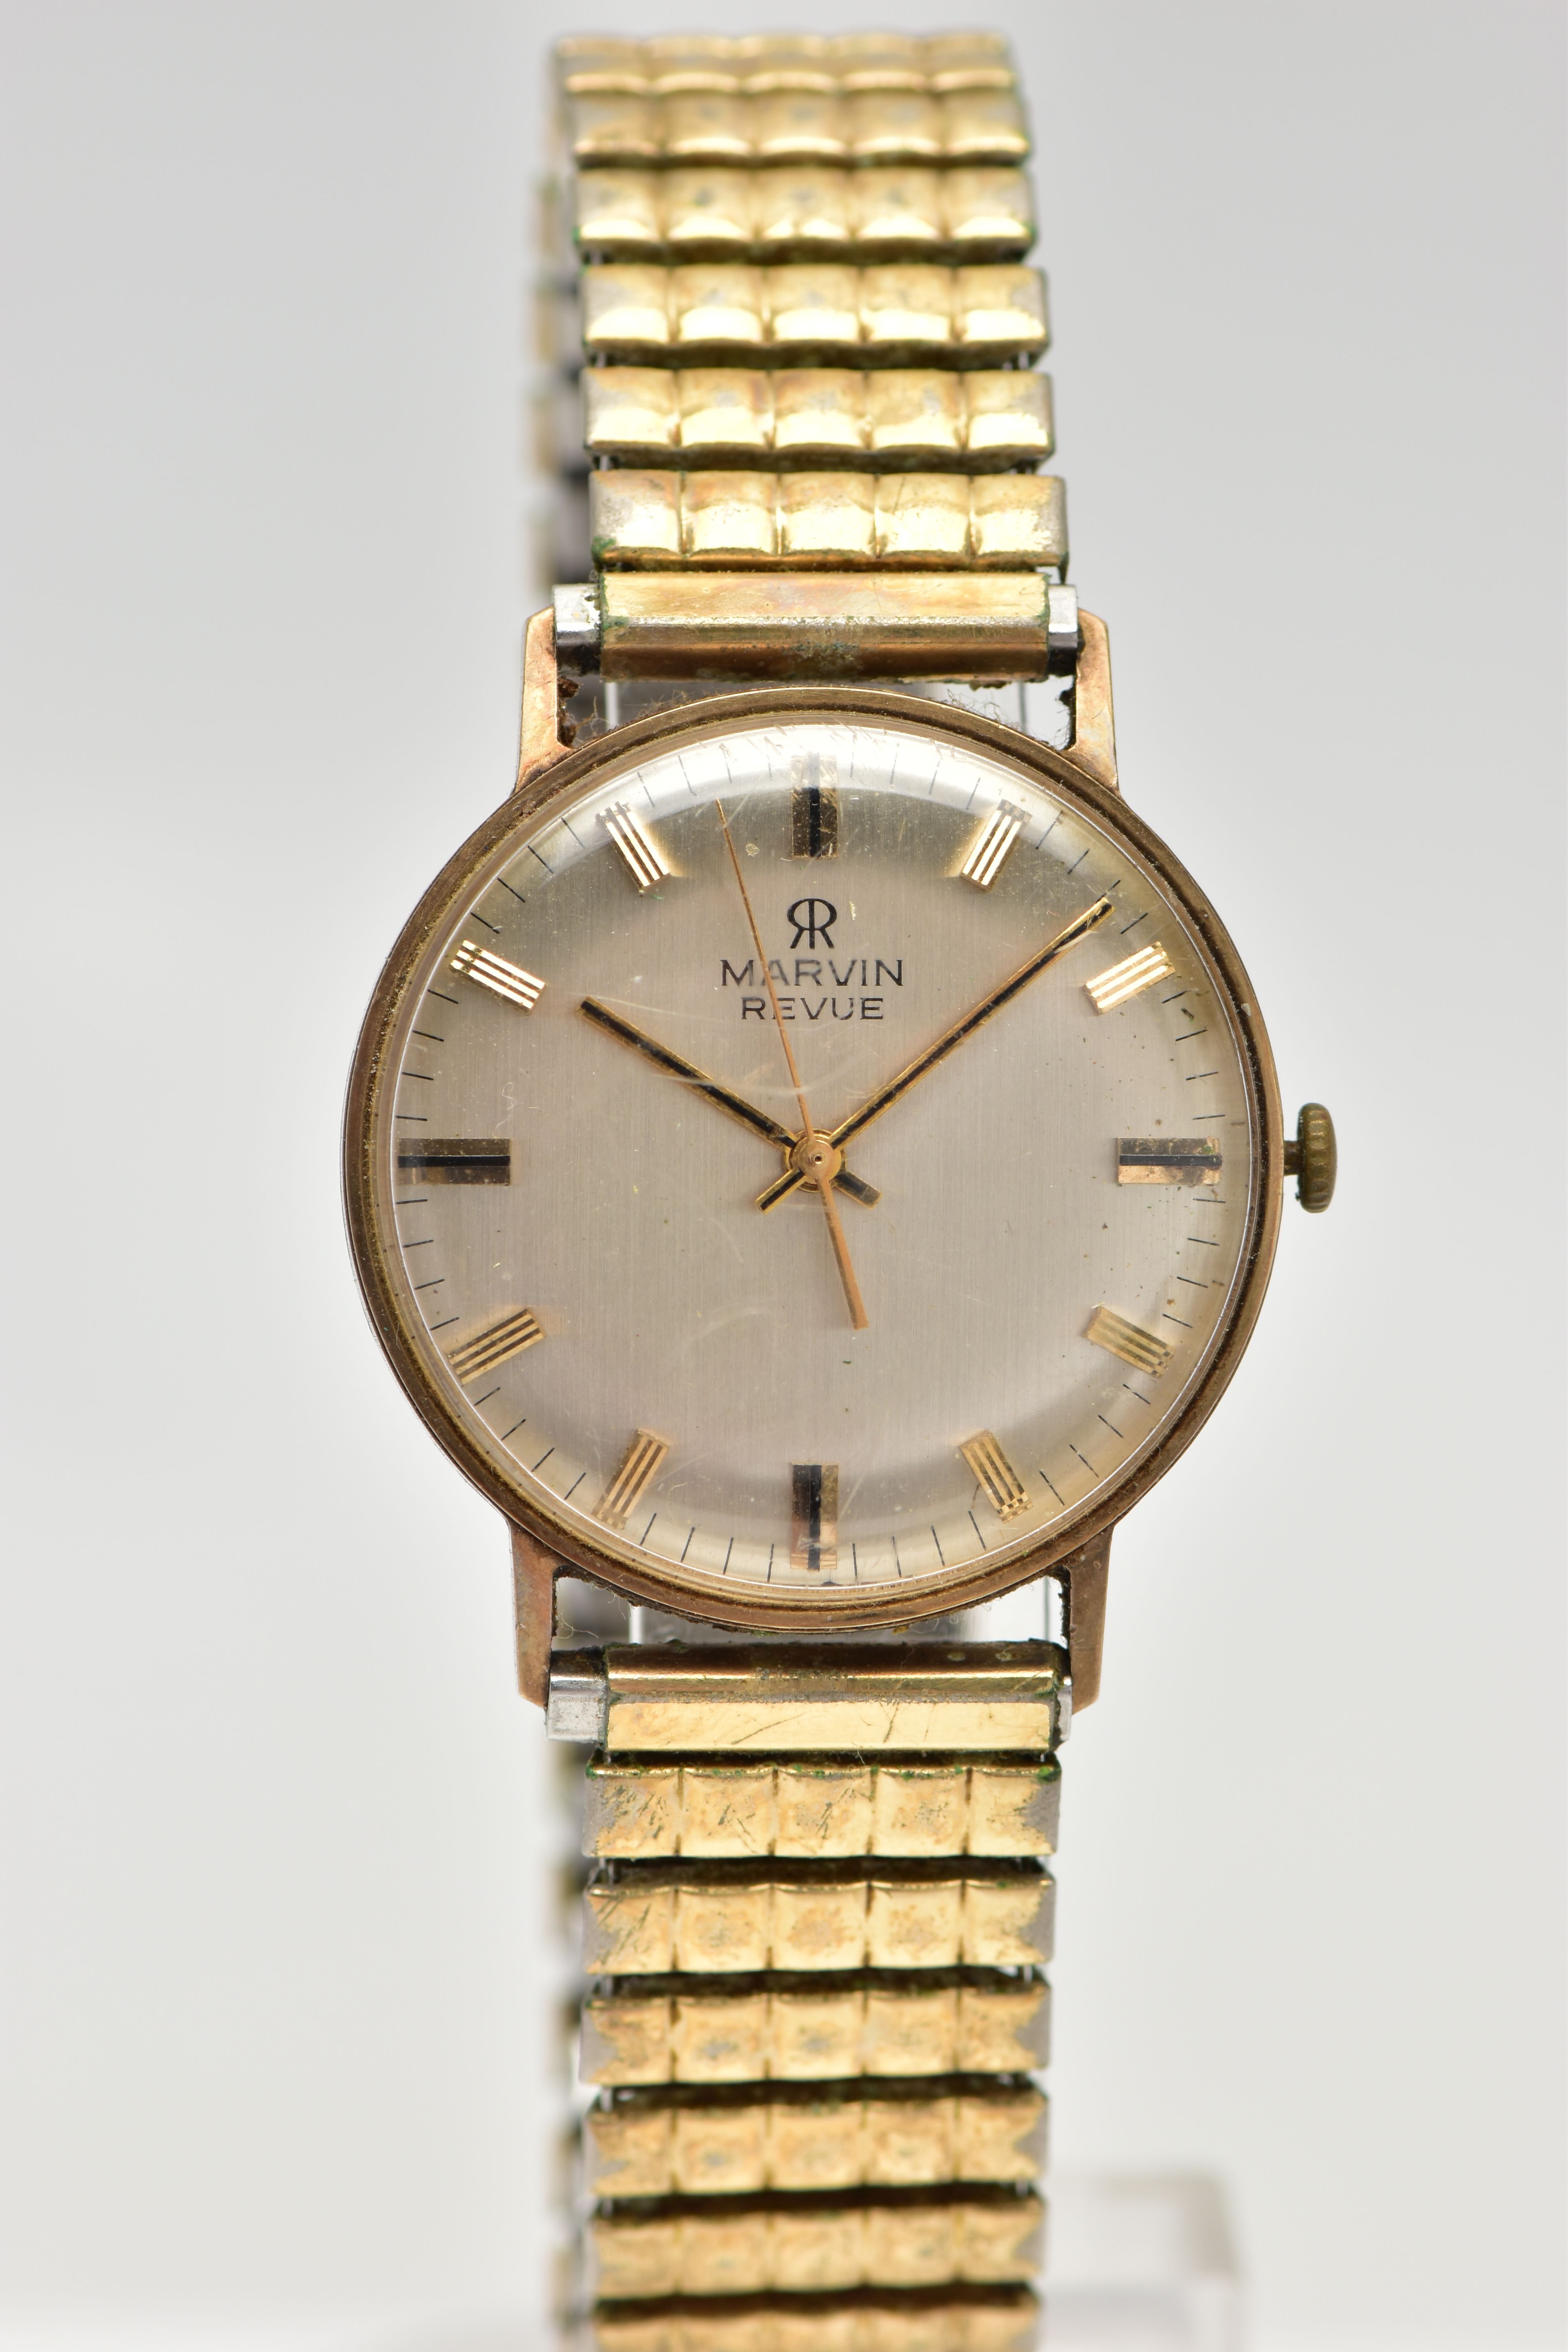 A 9CT GOLD 'MARVIN' WRISTWATCH, manual wind, round dial, signed 'Marvin Revue', baton markers,